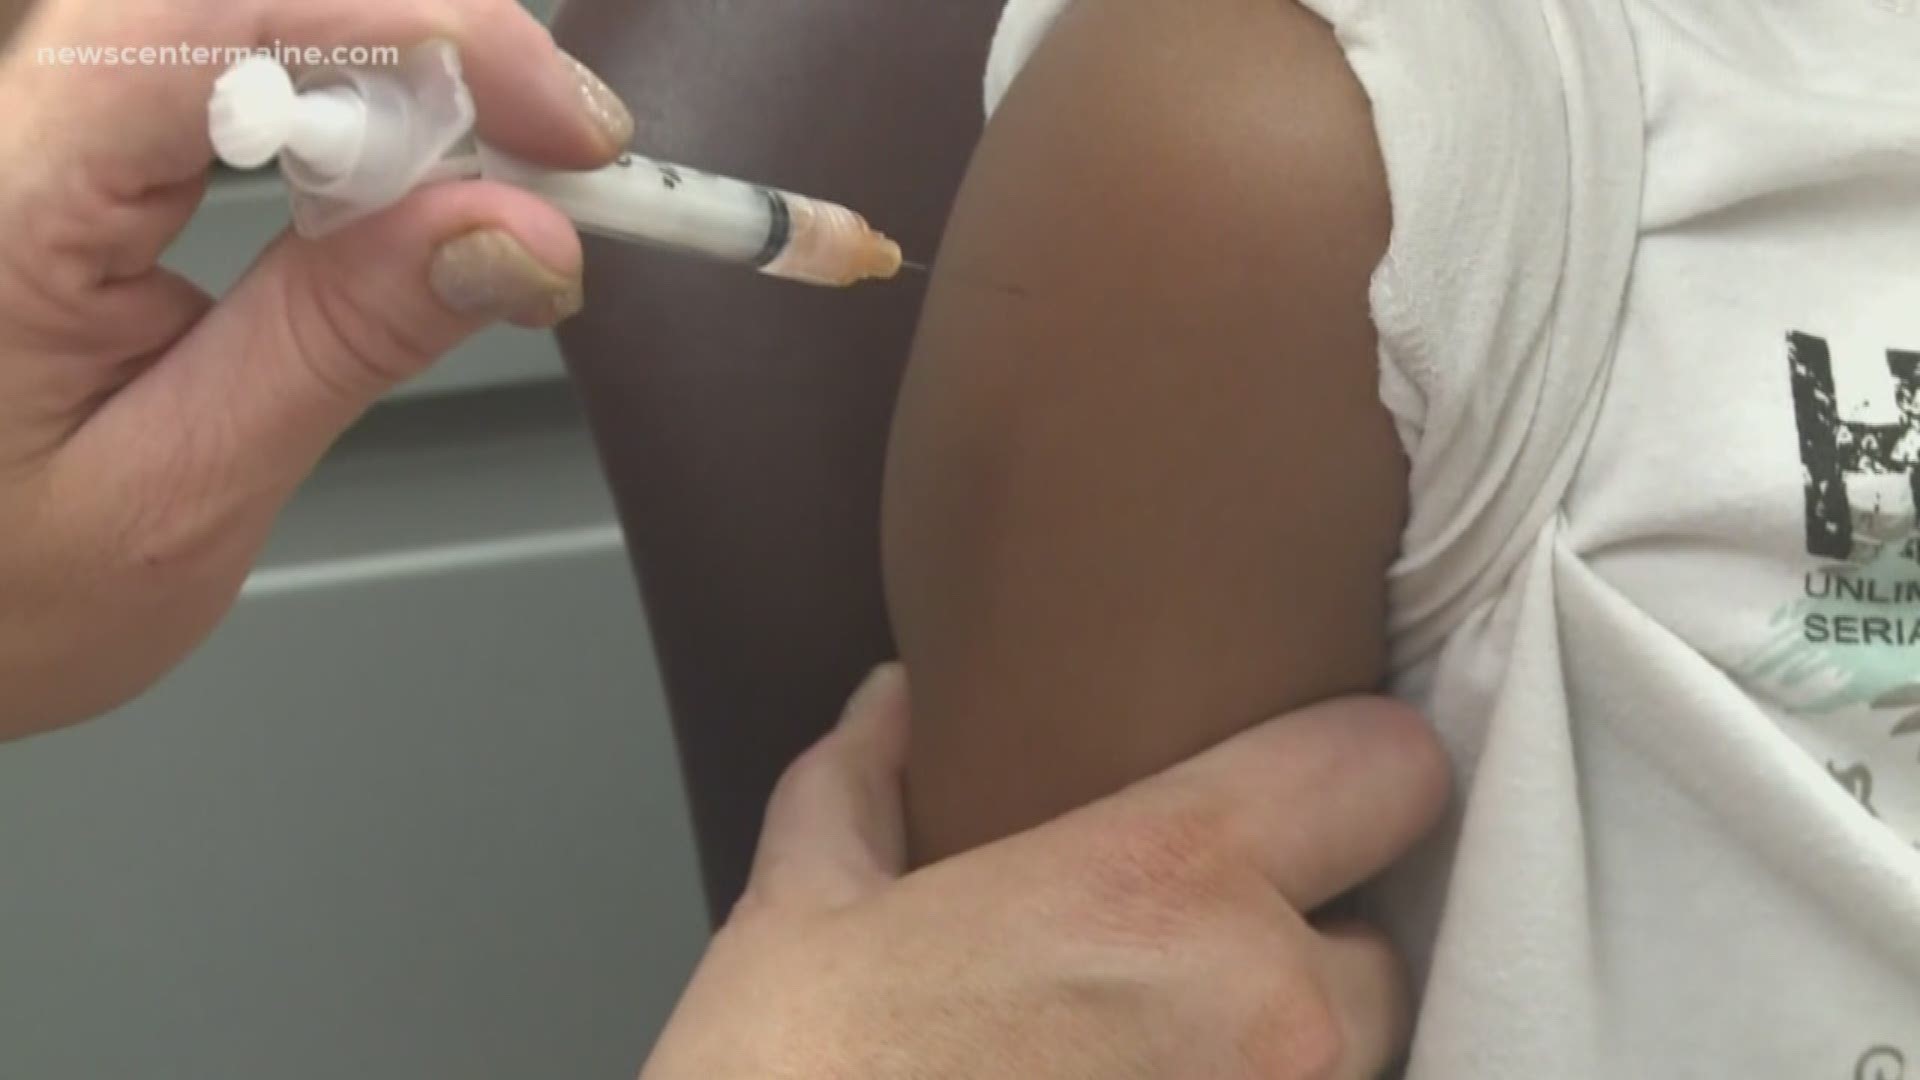 The Maine House of Representatives voted on Tuesday to limit vaccine exemptions in the state.